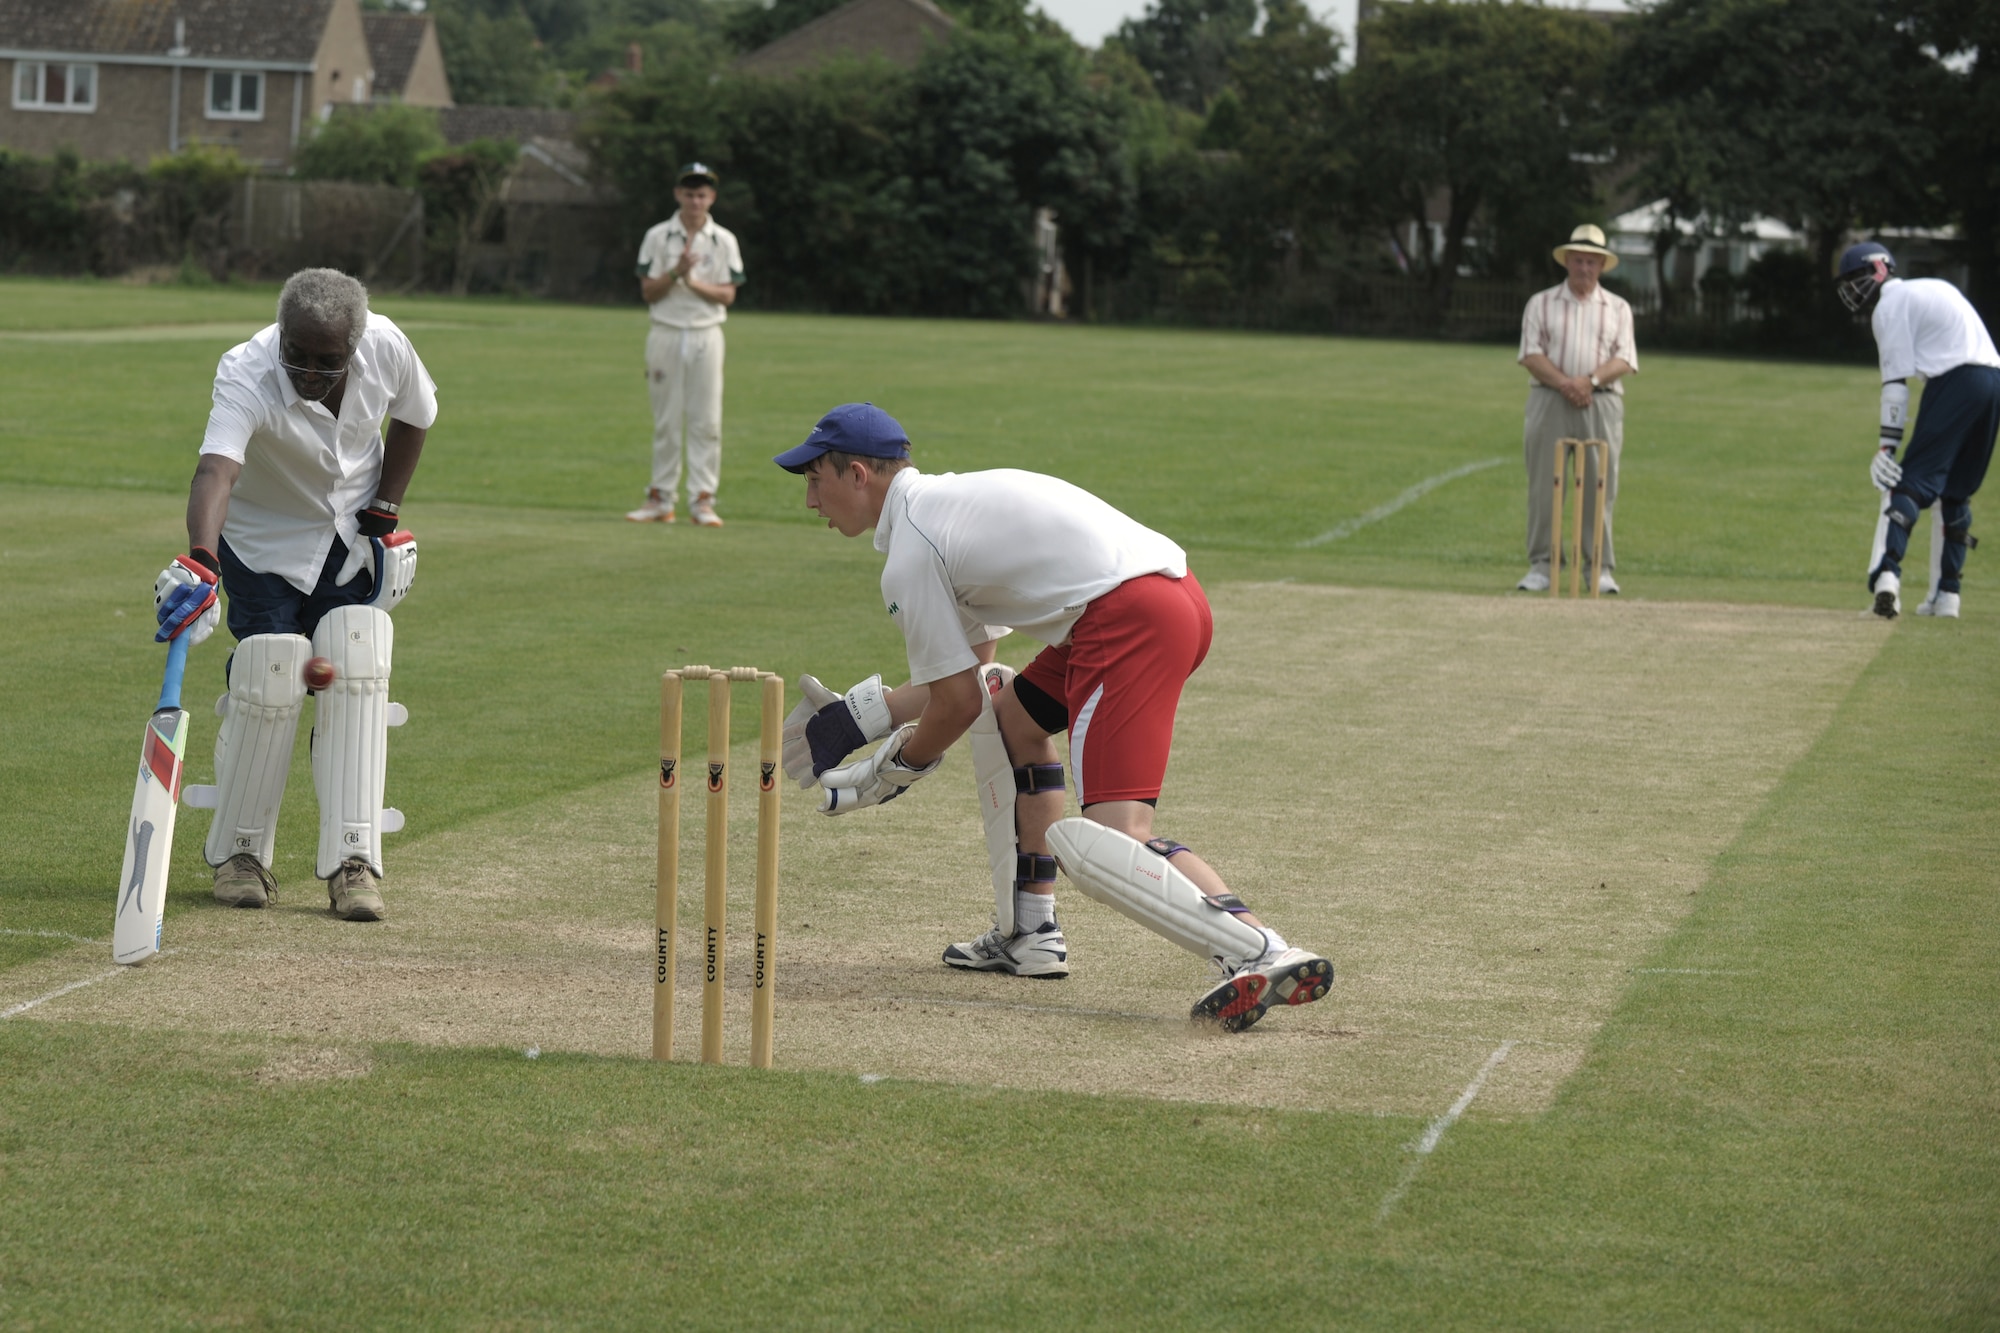 LONGSTANTON, United Kingdom – Cliff Walker, 423rd Air Base Group honorary commander and 423ADG cricket coach, scores a run for the ABG team during the first game played by the team Aug. 19 at Longstanton Bowls Club in Longstanton, United Kingdom. If the batsman is successful in striking the ball and the ball isn’t caught before it hits the ground, the two batsmen may then try to score points (runs) for their team by running across the pitch, grounding their bats behind each other's crease. Each crossing and grounding by both batsmen is worth one run. The batsmen may attempt multiple runs or elect not to run at all. By attempting runs, the batsmen risk dismissal, which can happen if the fielding team retrieves the ball and hits a wicket with the ball before either batsman reaches the opposite crease.  (U.S. Air Force photo by Master Sgt. John Barton)